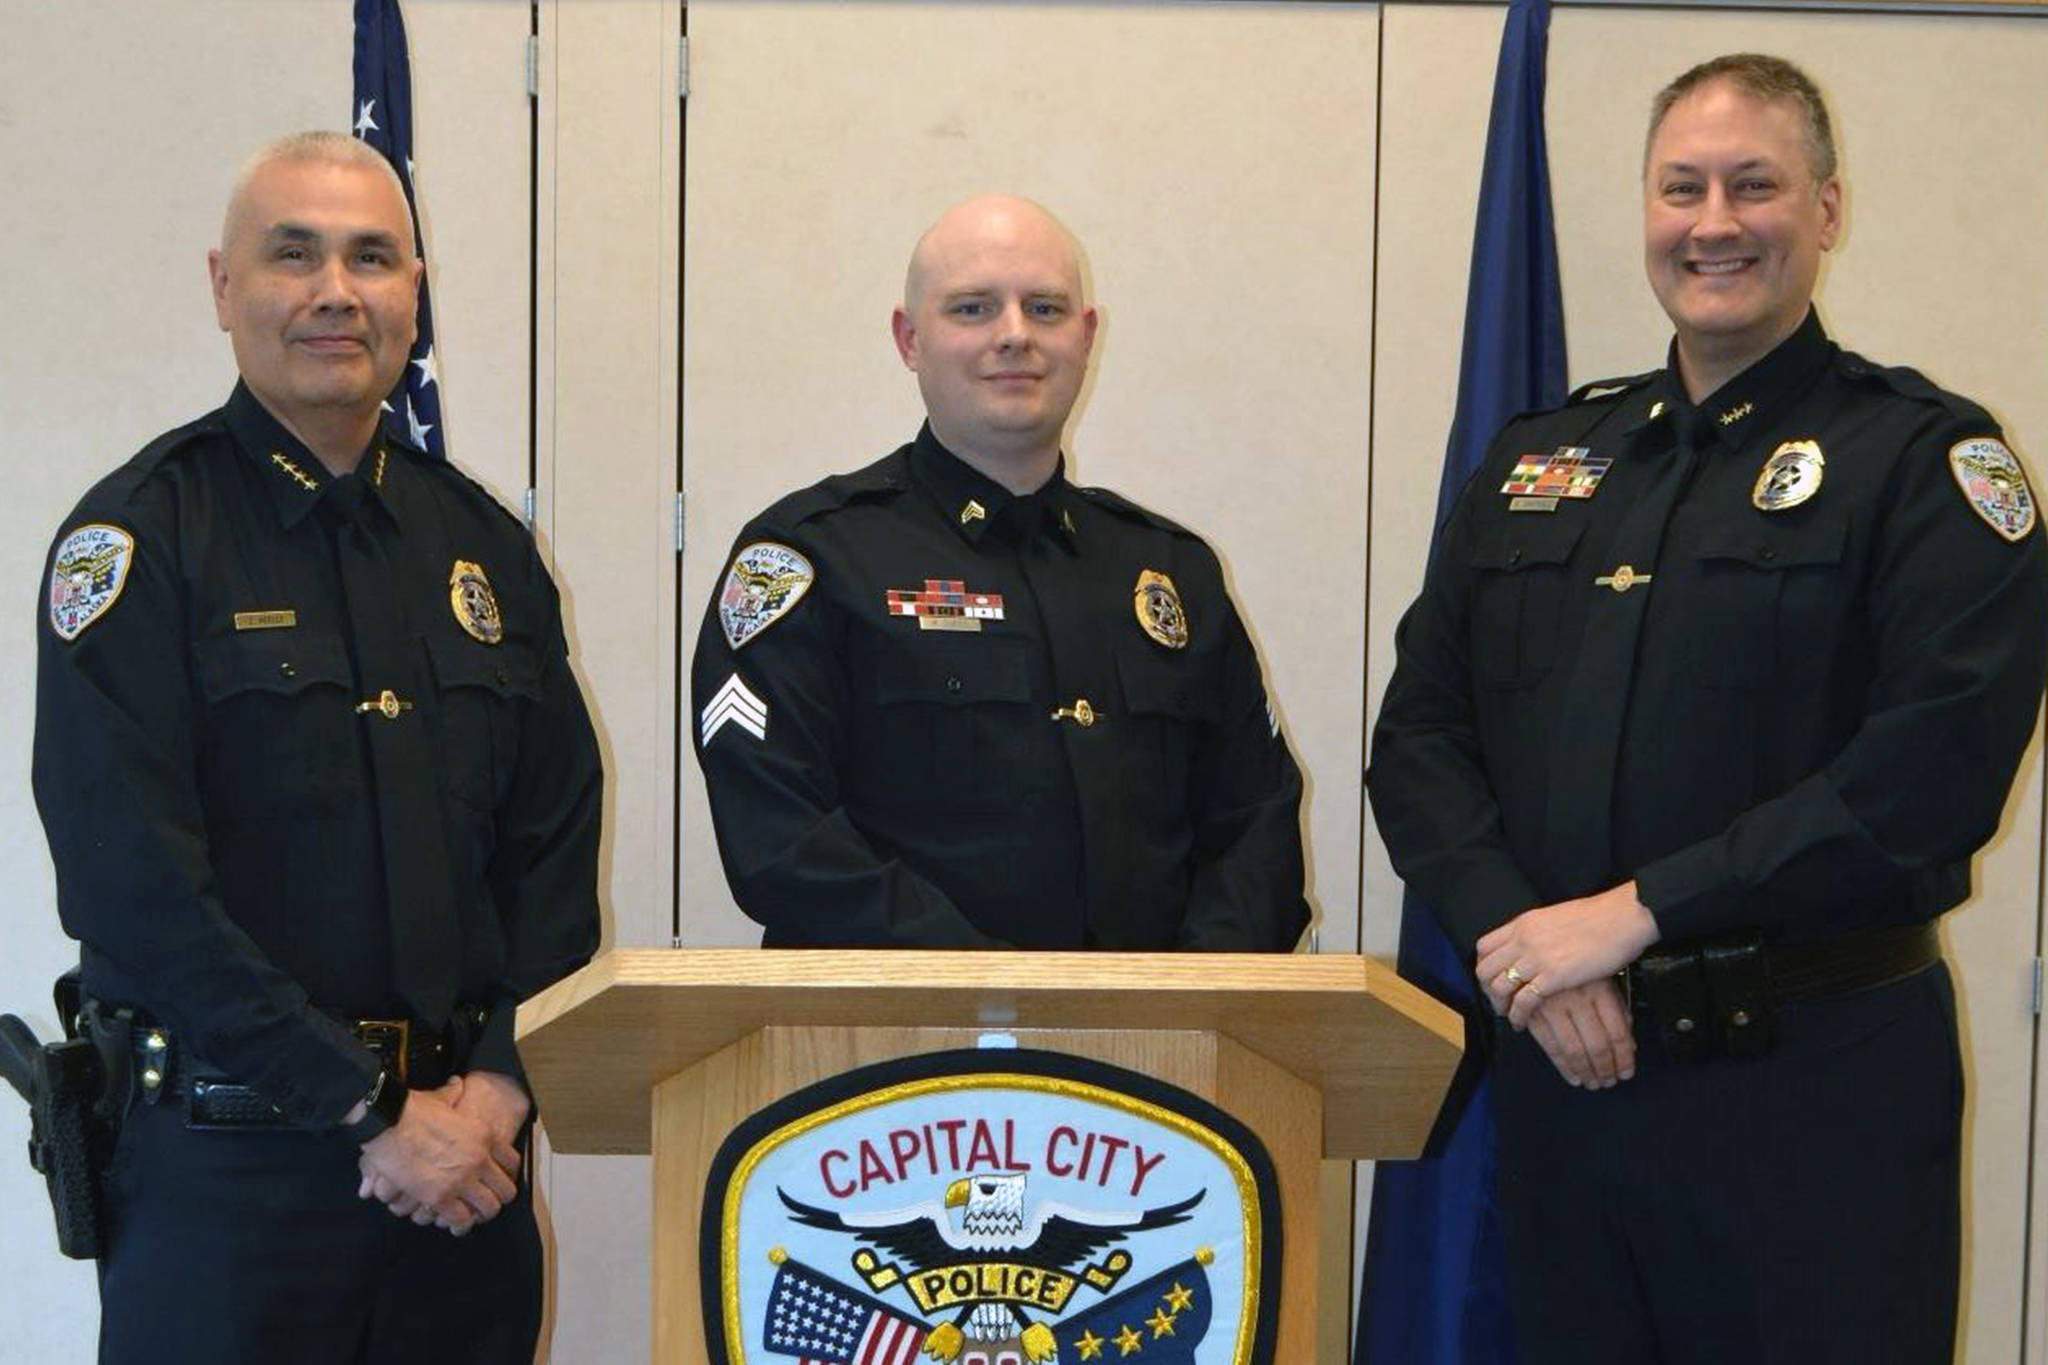 Sgt. Matt Dubois, center, stands with Juneau Police Chief Ed Mercer, left, and Deputy Chief David Campbell, right, during his promotion ceremony on Monday, April 15, 2019. (Courtesy photo | Juneau Police Department Facebook)